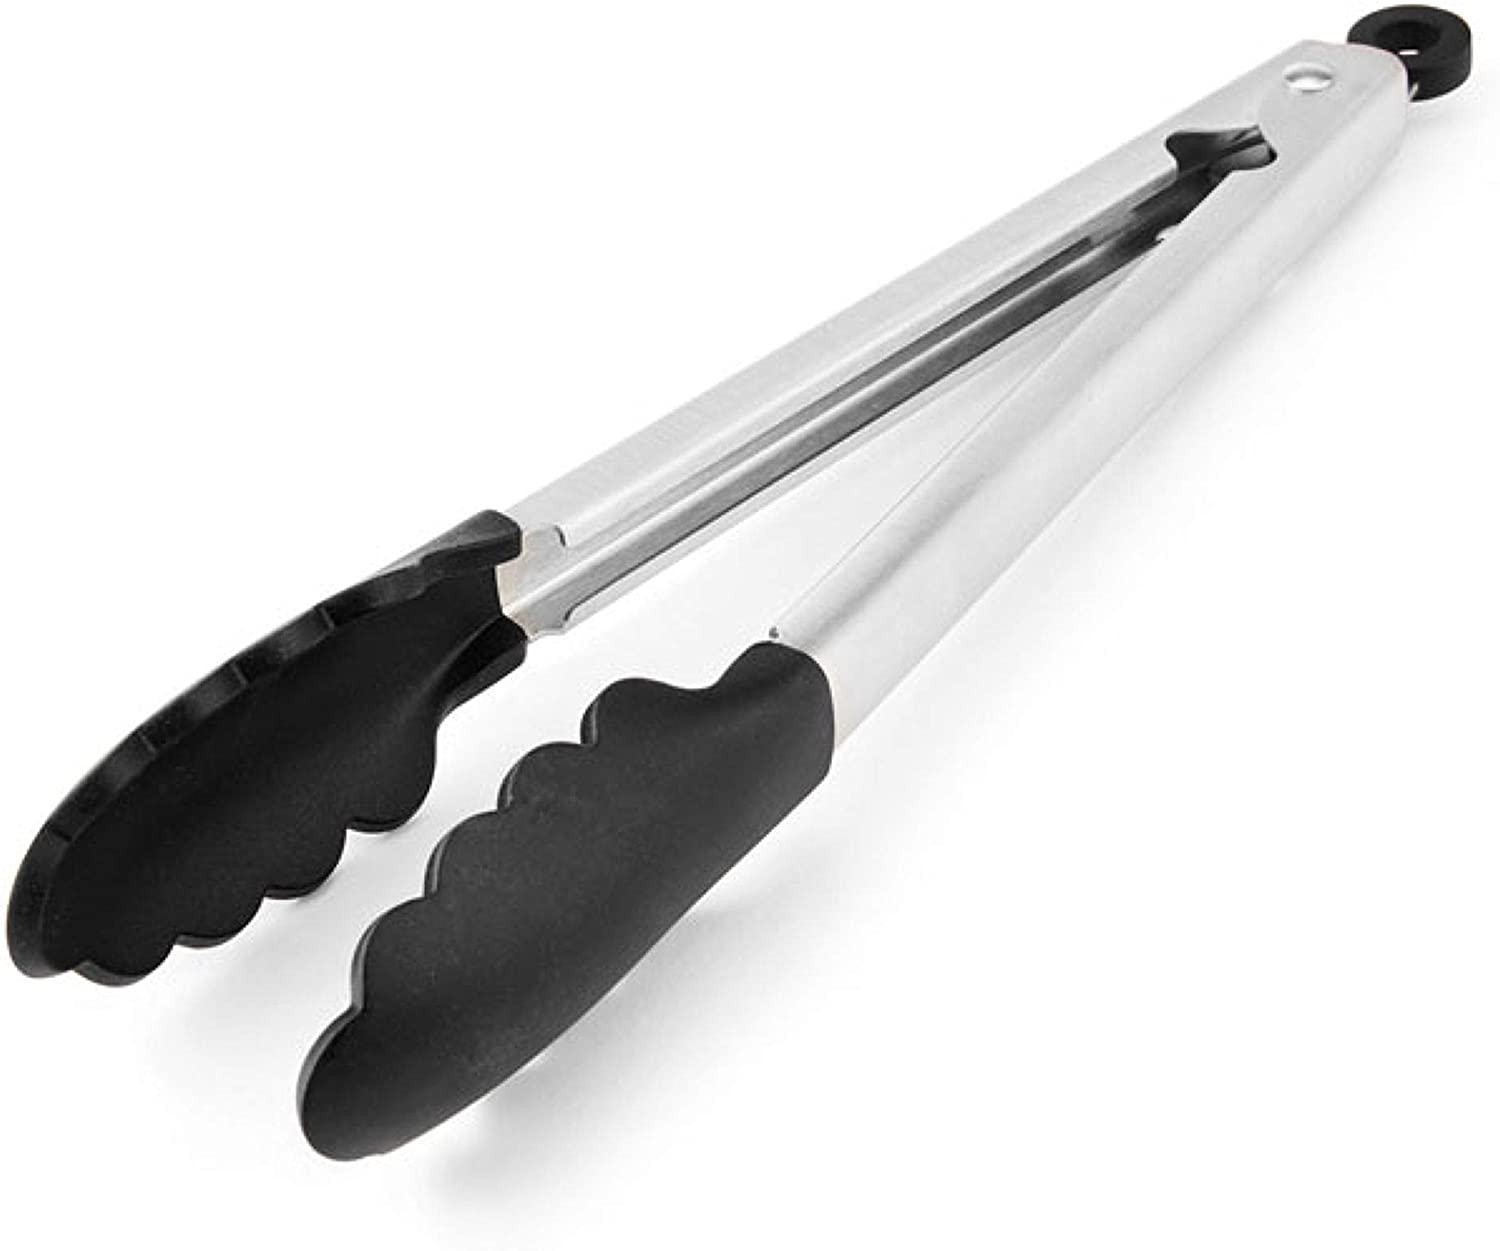 You are currently viewing KitchenAid Silicone Tipped Stainless Steel Tongs, 10.26-Inch, Black